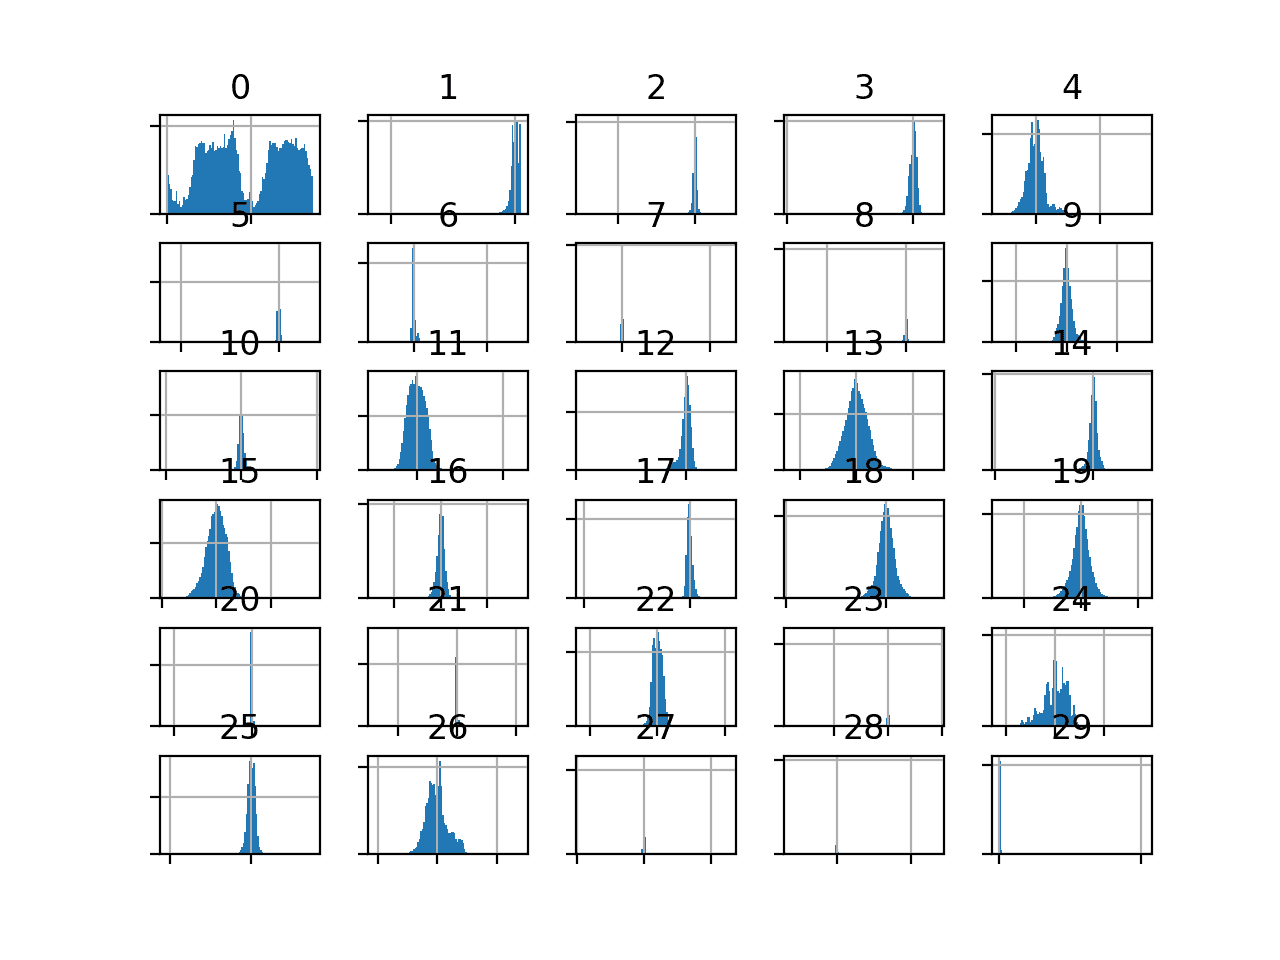 Histogram of Input Variables in the Credit Card Fraud Dataset